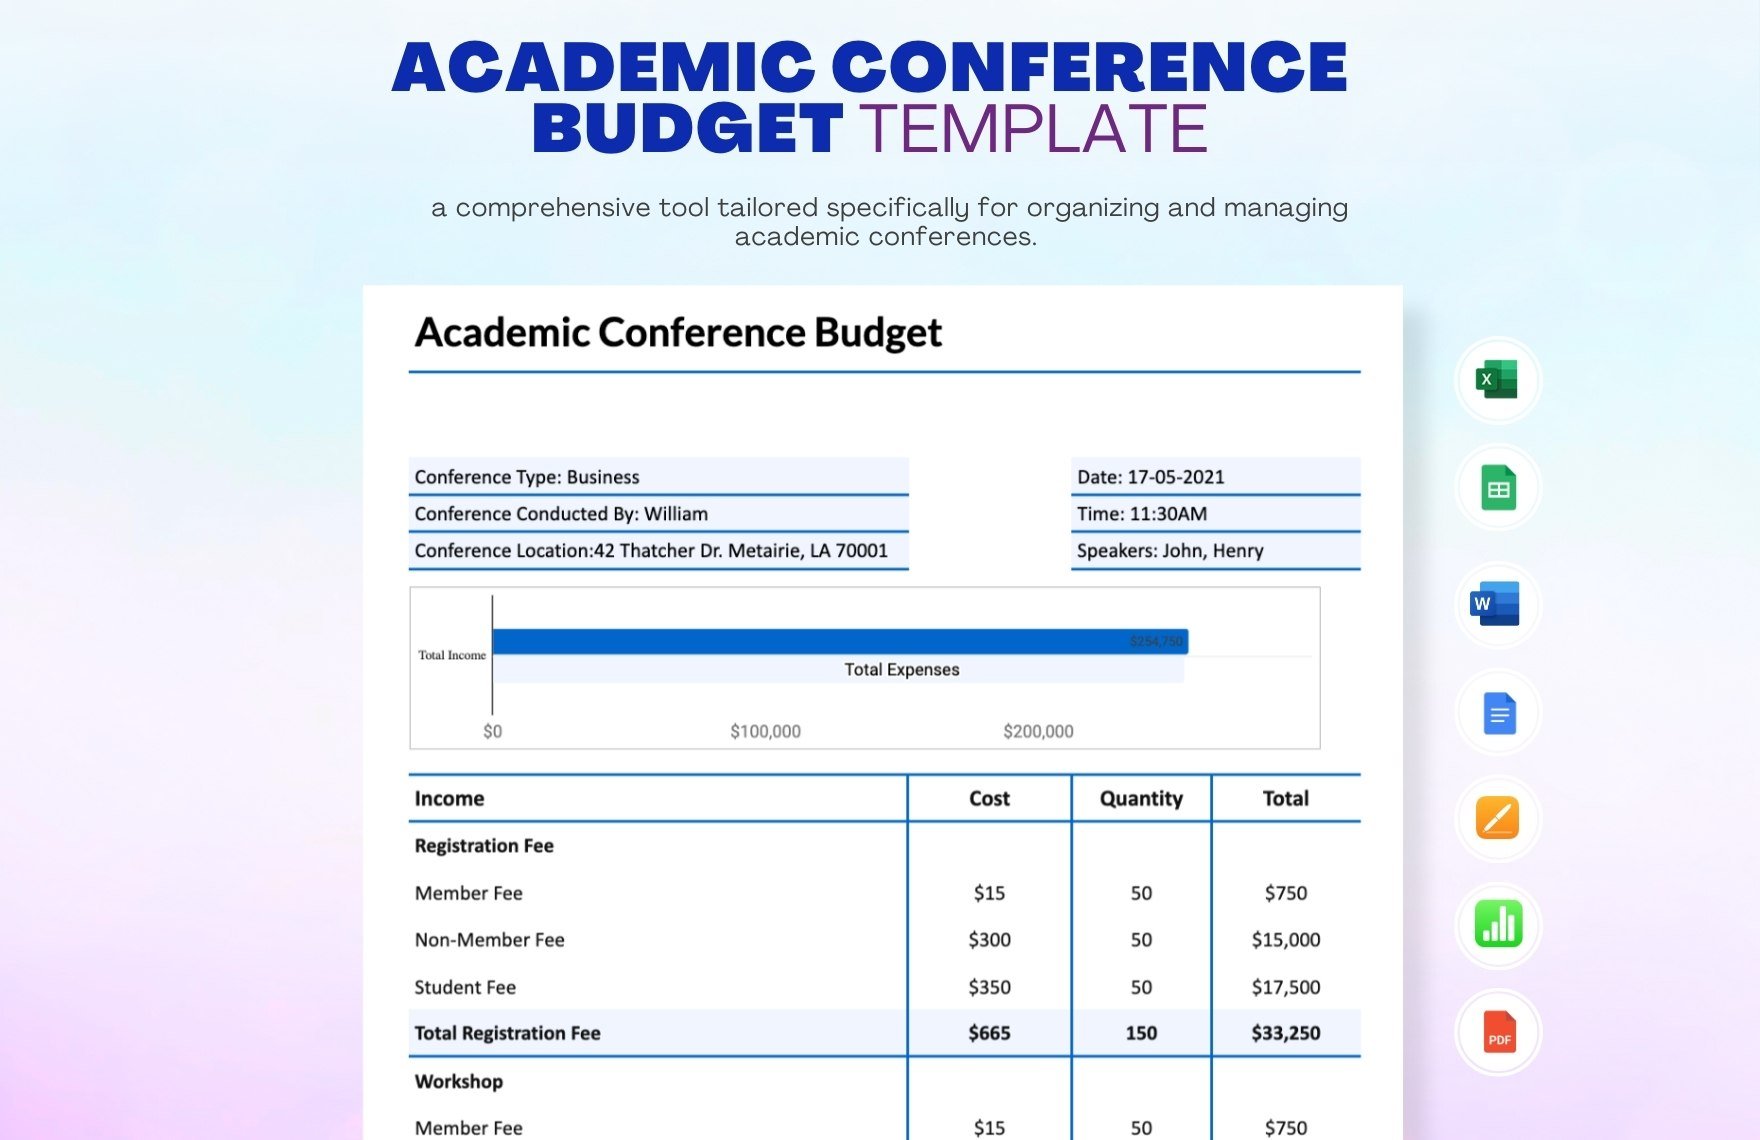 Academic Conference Budget Template in Word, Google Docs, Excel, PDF, Google Sheets, Apple Pages, Apple Numbers